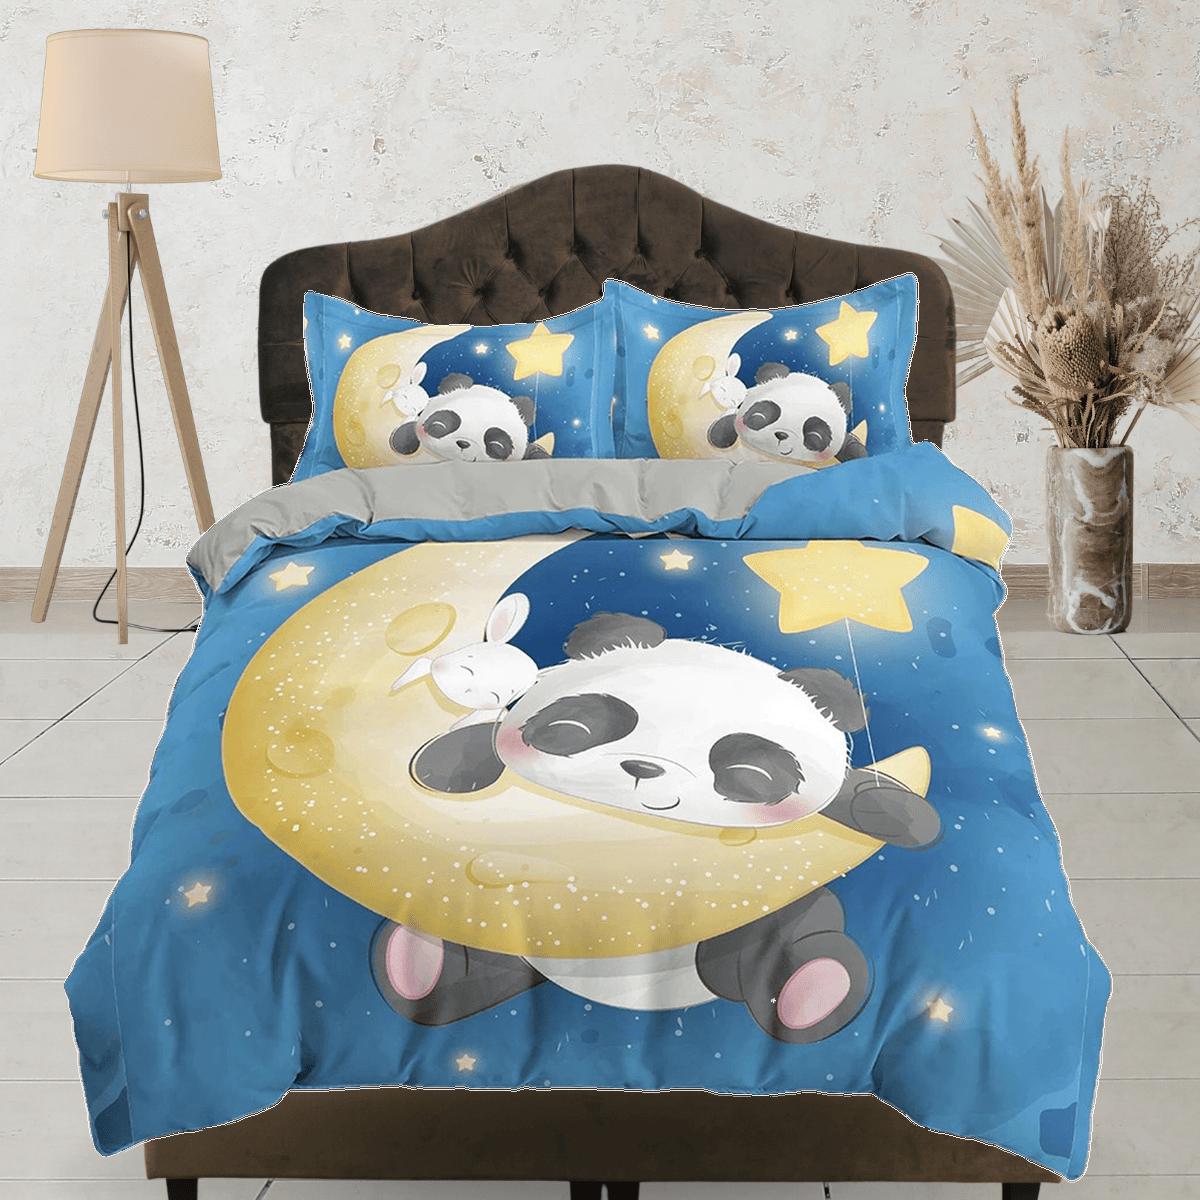 daintyduvet Cute panda and bunny in crescent moon, blue toddler bedding, duvet cover for kids, crib bedding, baby zipper bedding, king queen full twin